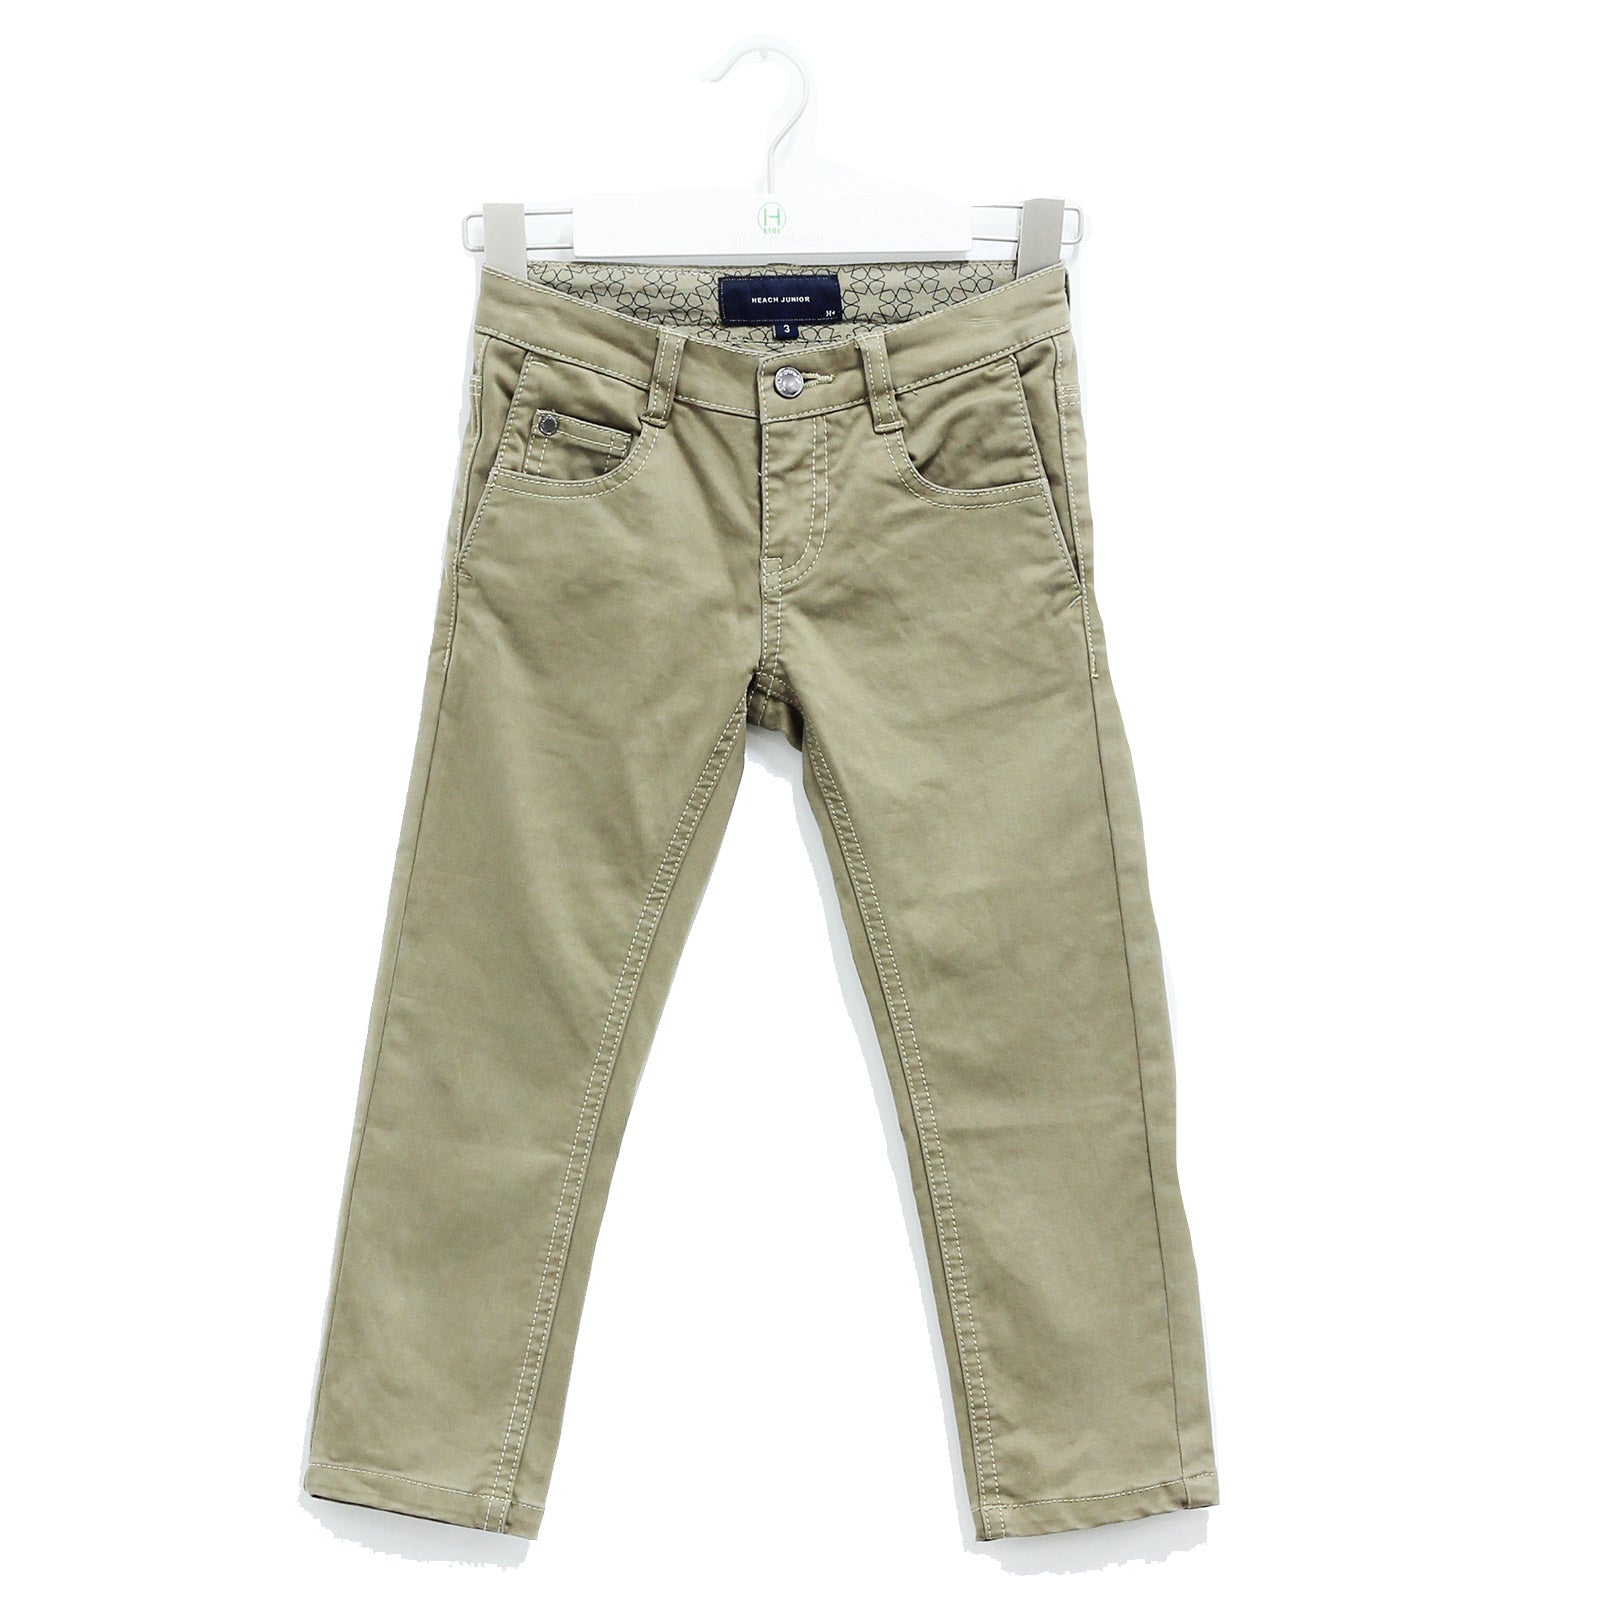 
  Trousers from the Silvian Heach Kids clothing line sports model with double front pockets and ...